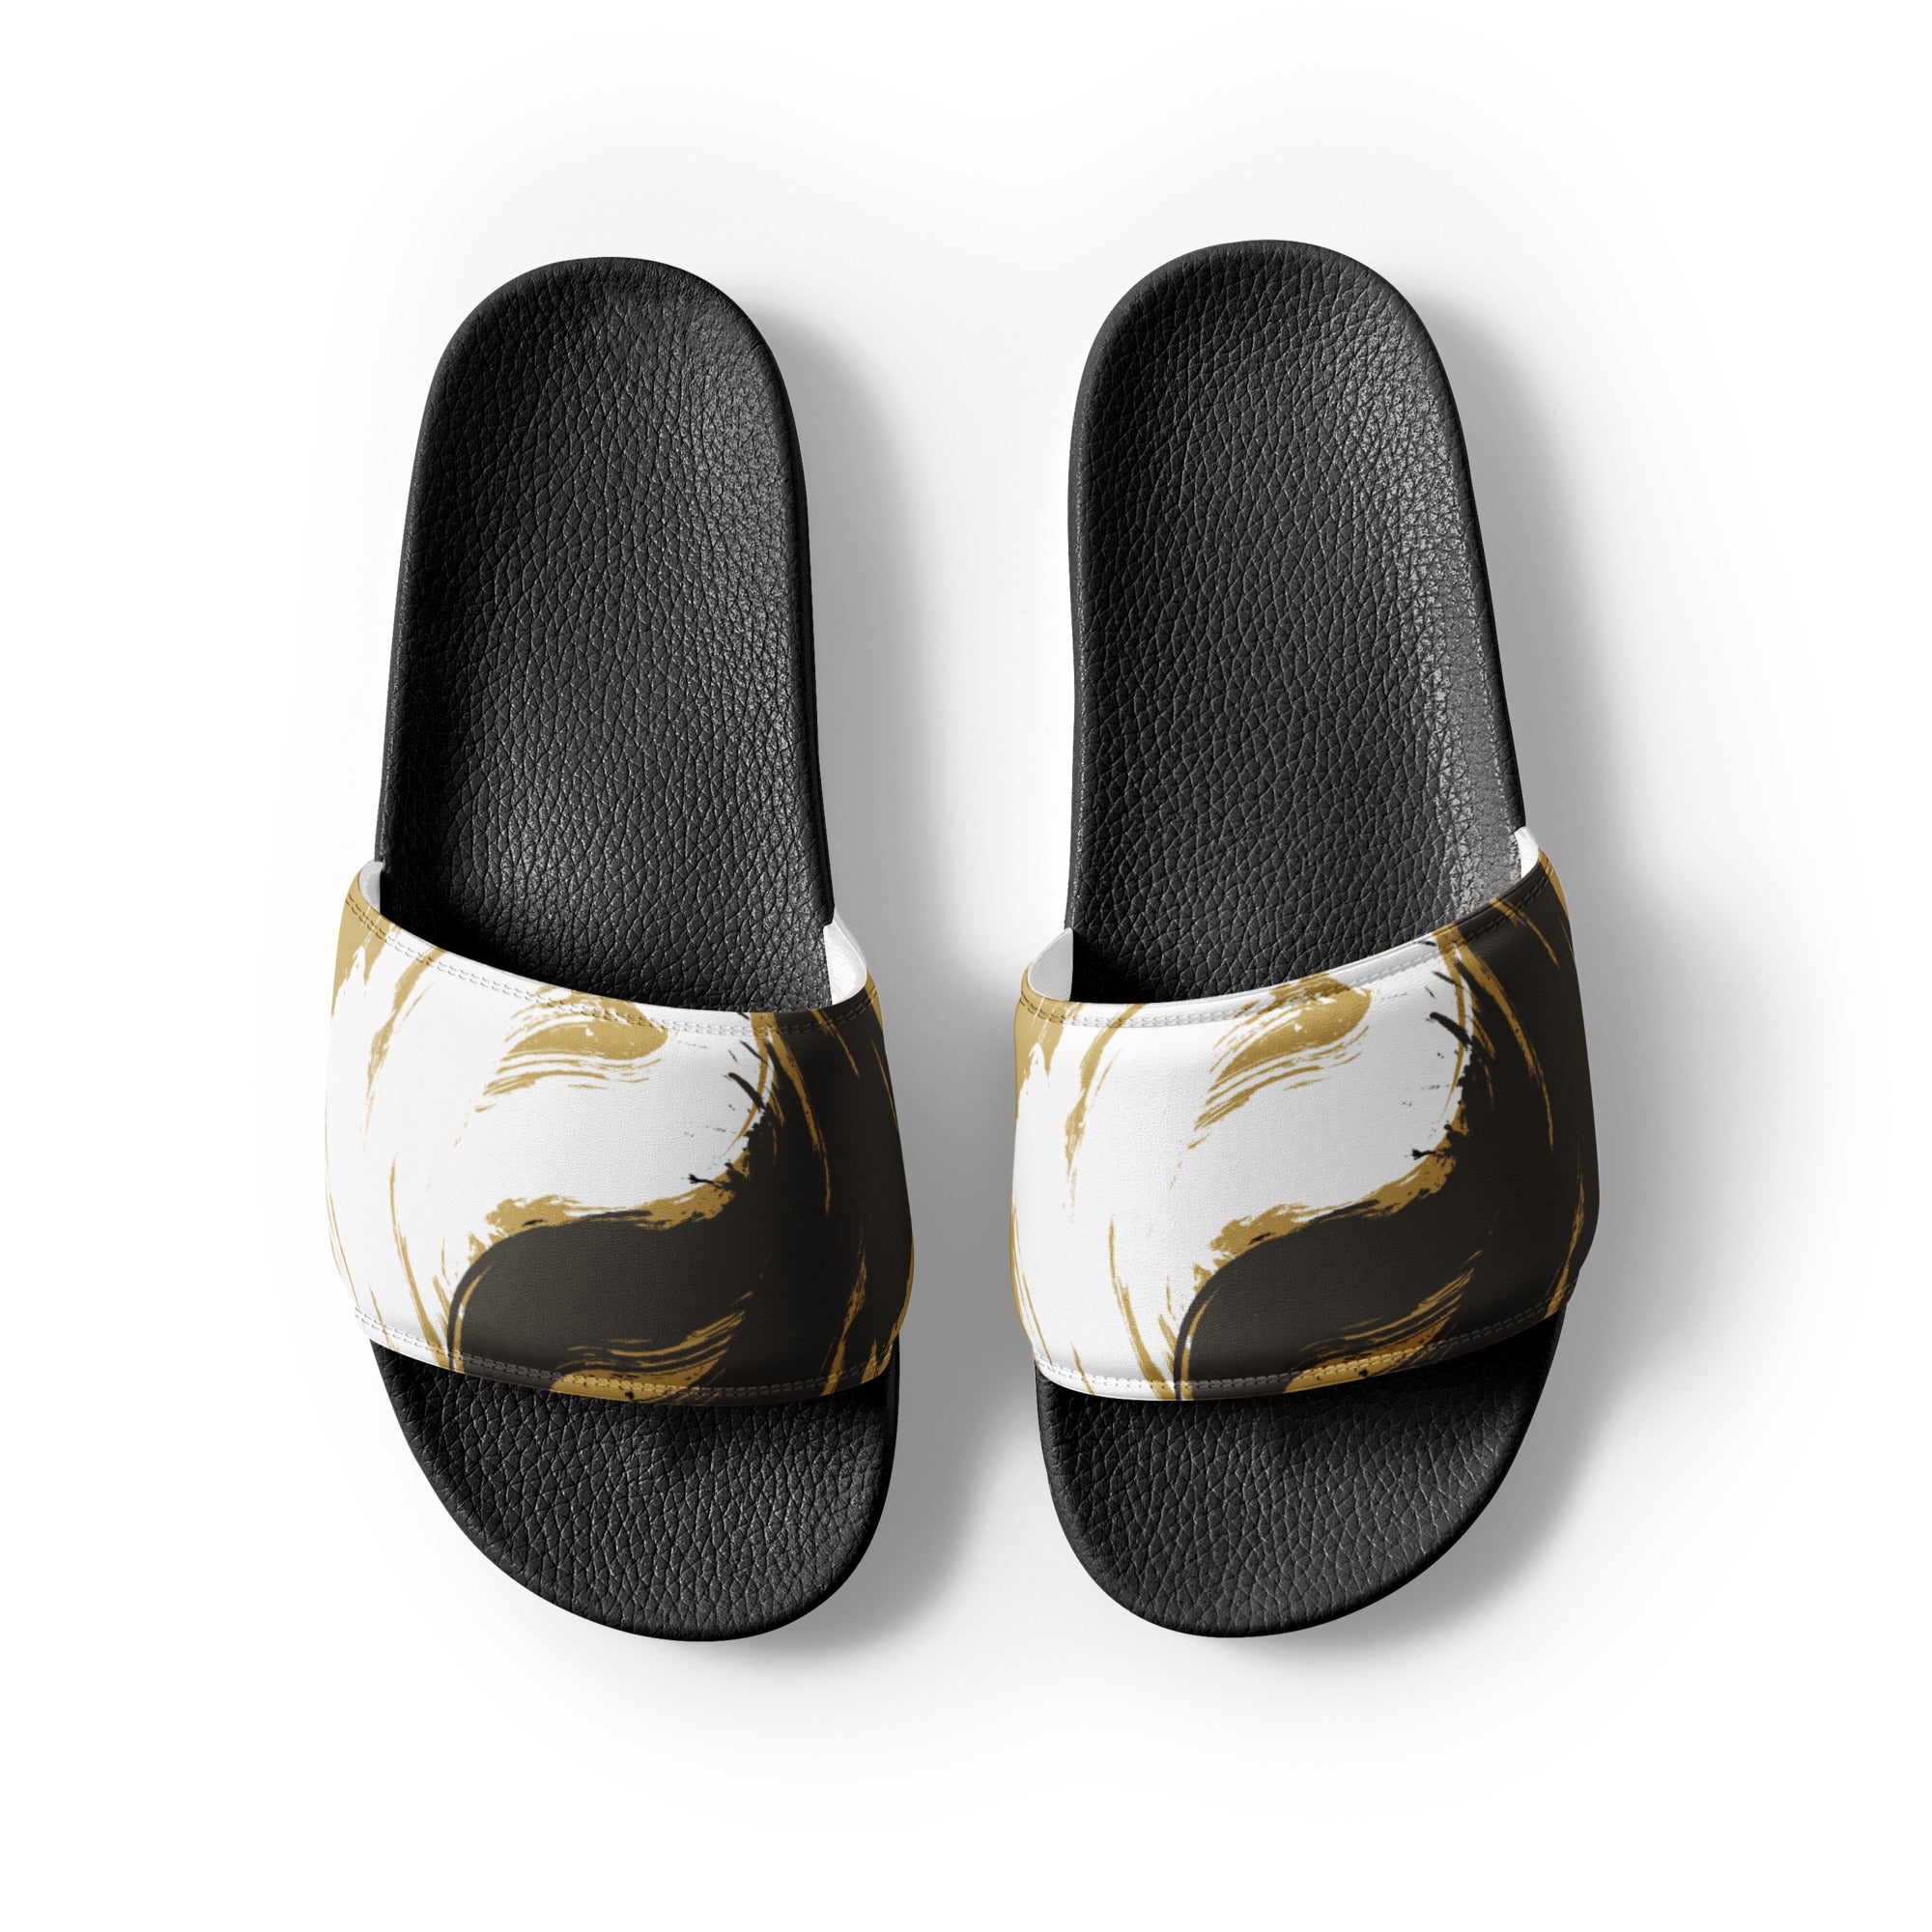 Handmade Women's slides - Personal Hour for Yoga and Meditations 